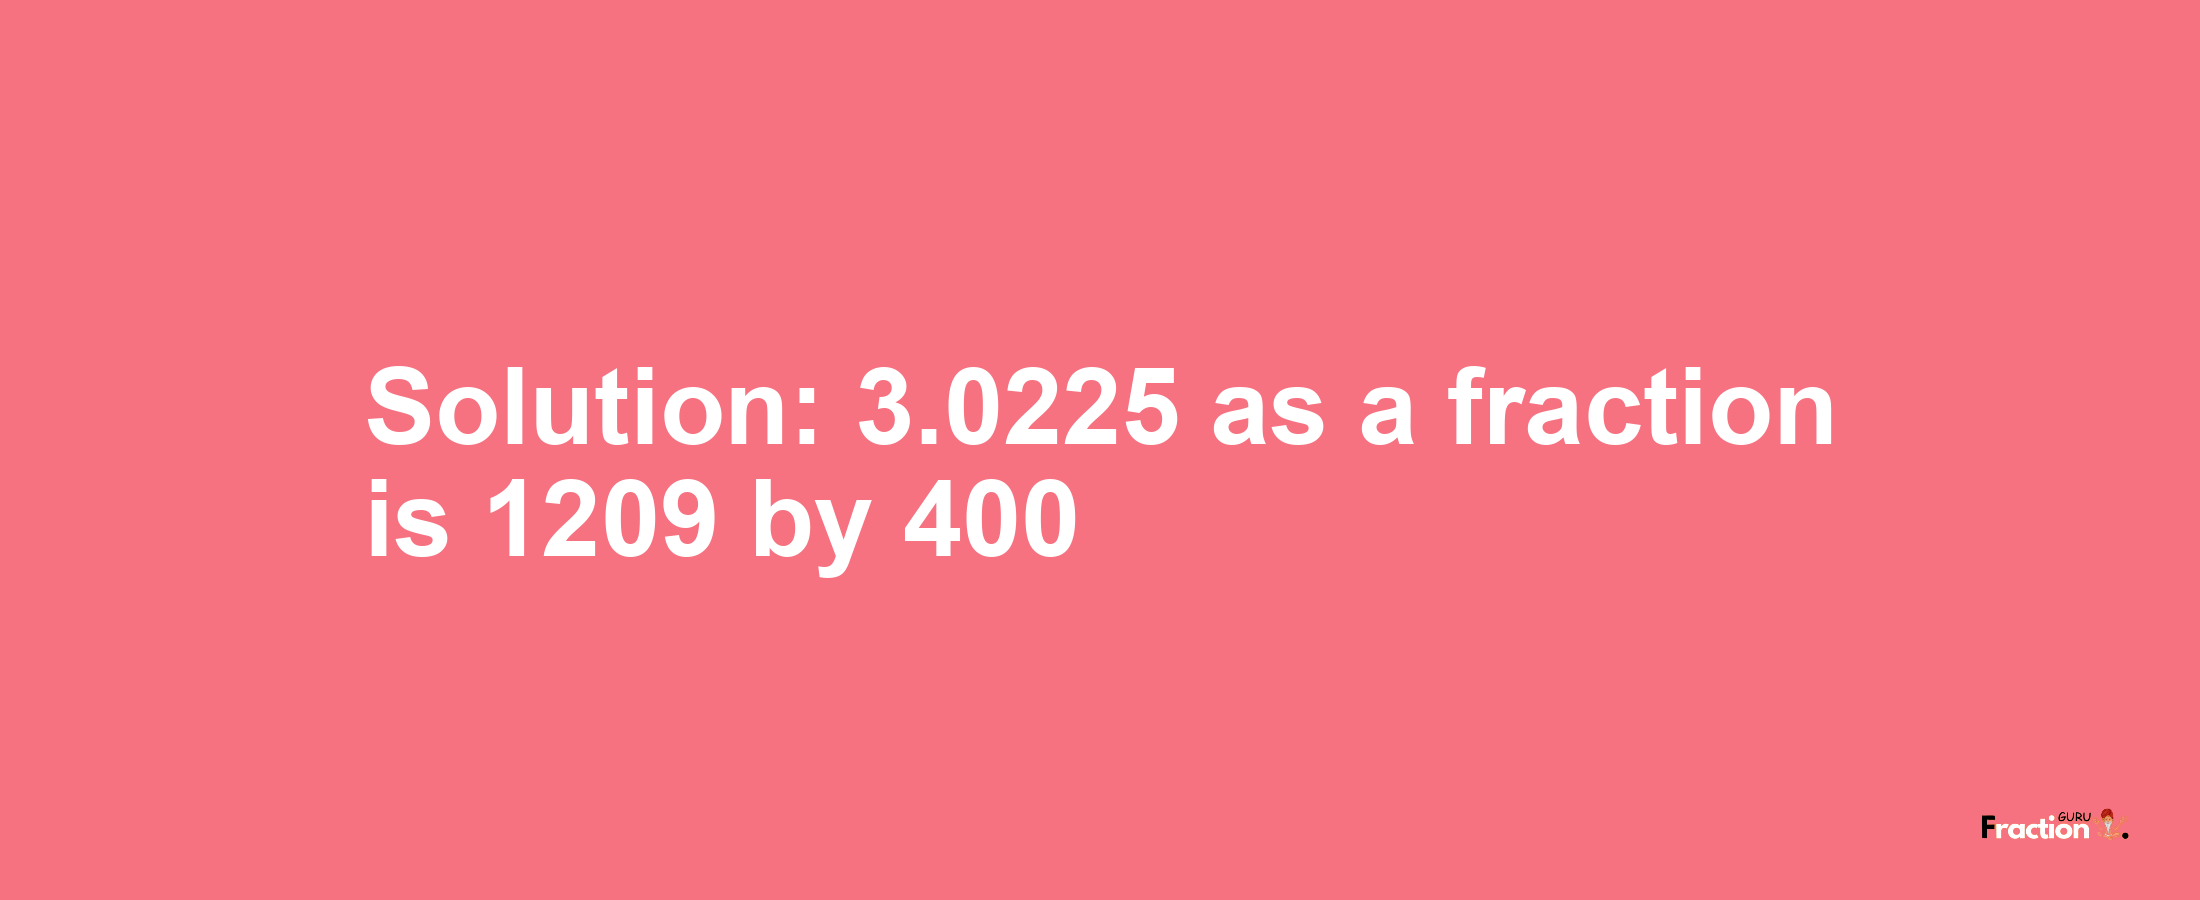 Solution:3.0225 as a fraction is 1209/400